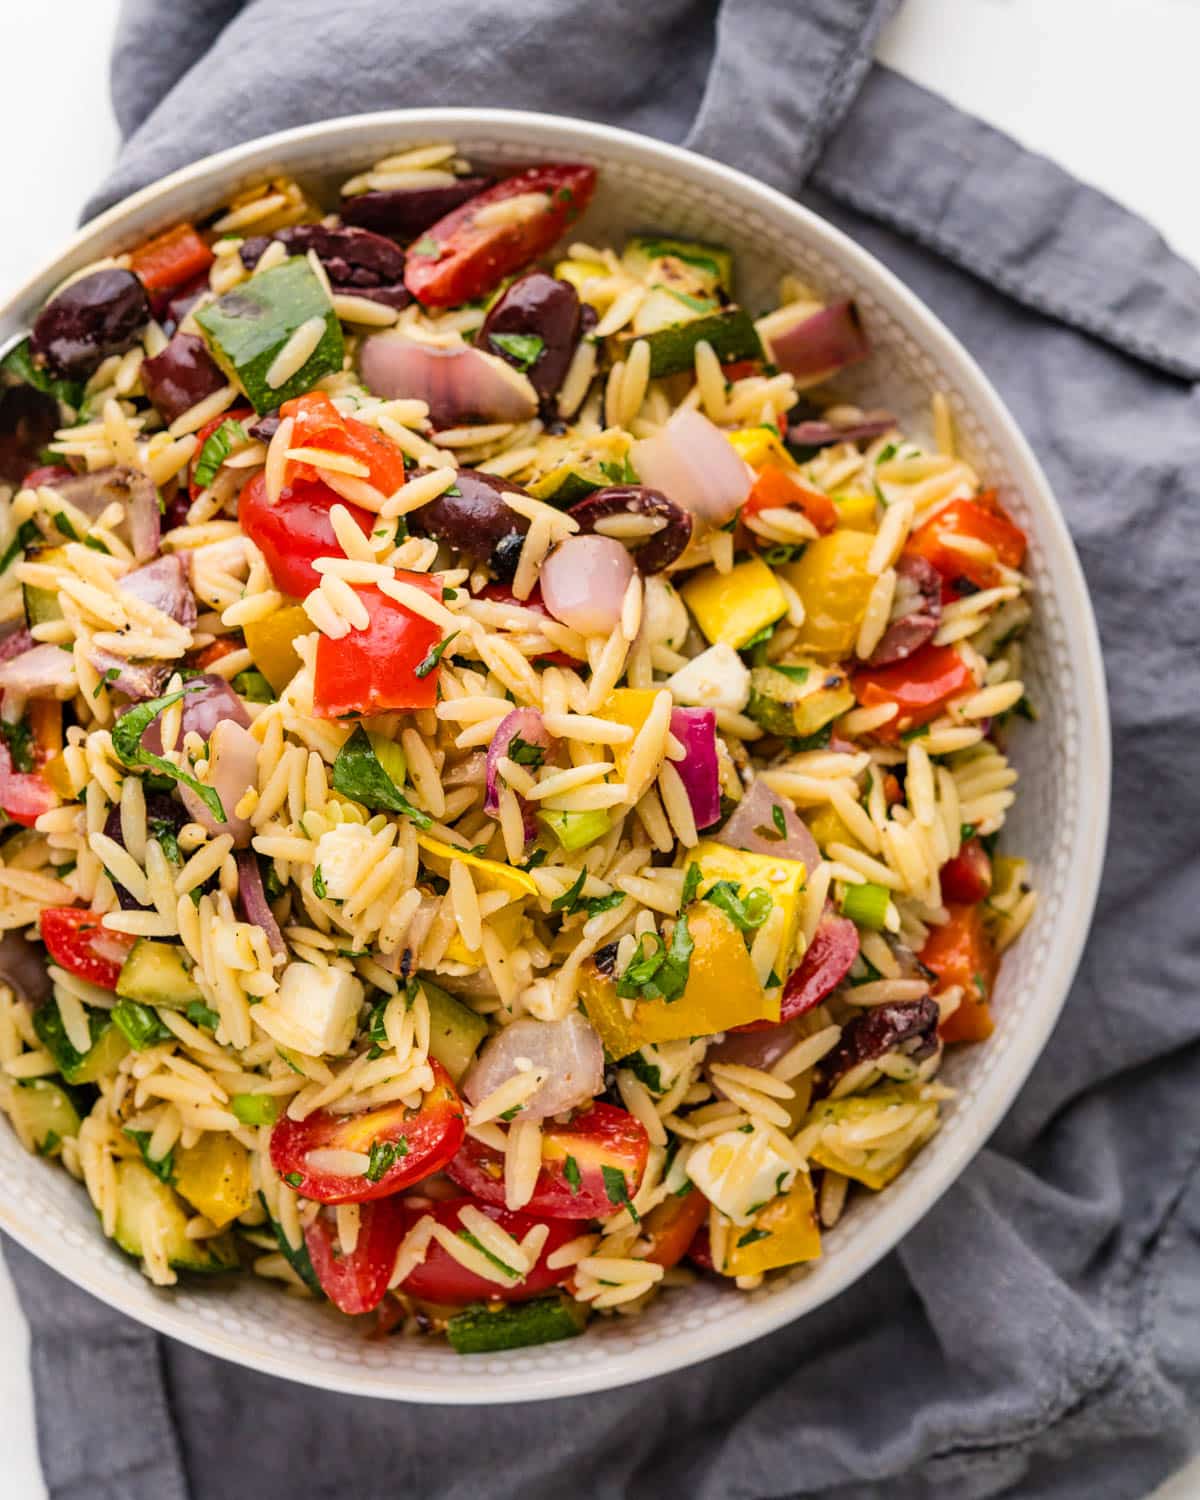 Grilled veggie salad with orzo pasta and feta cheese.